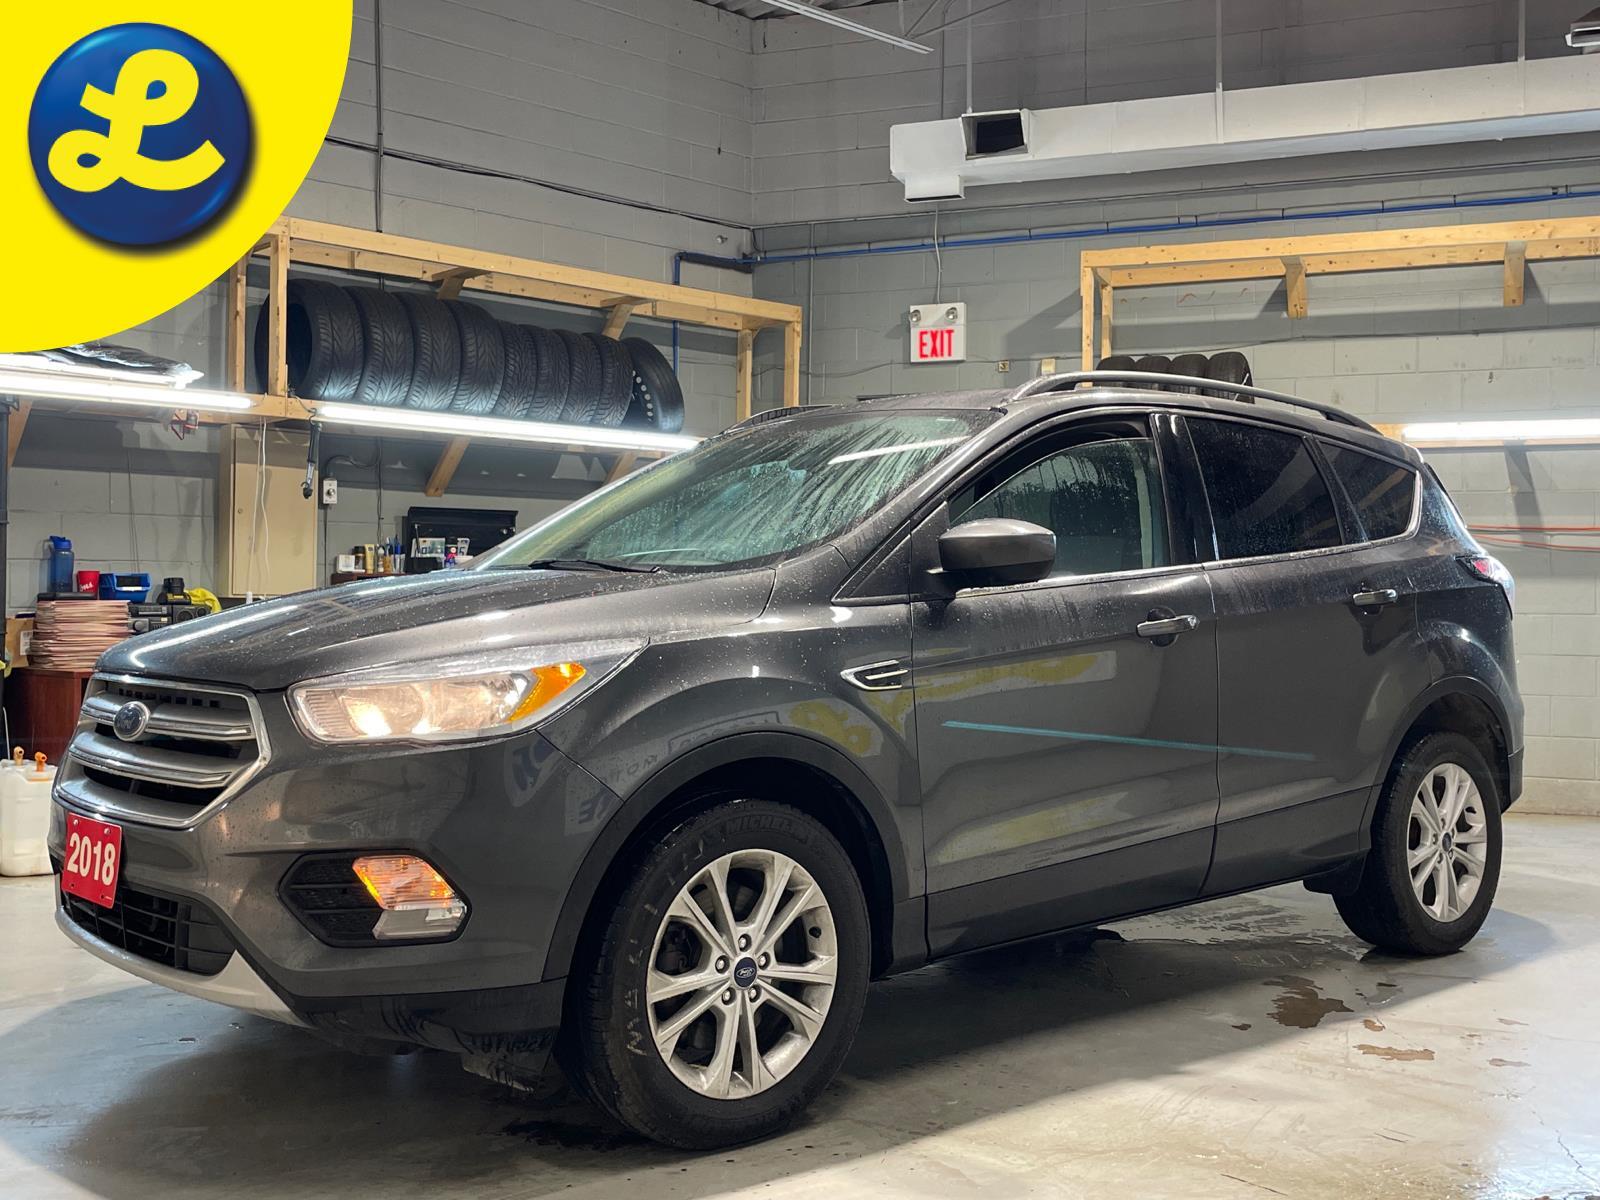 2018 Ford Escape ECOBOOST AWD  Remote Start  Back Up Camera  Heated